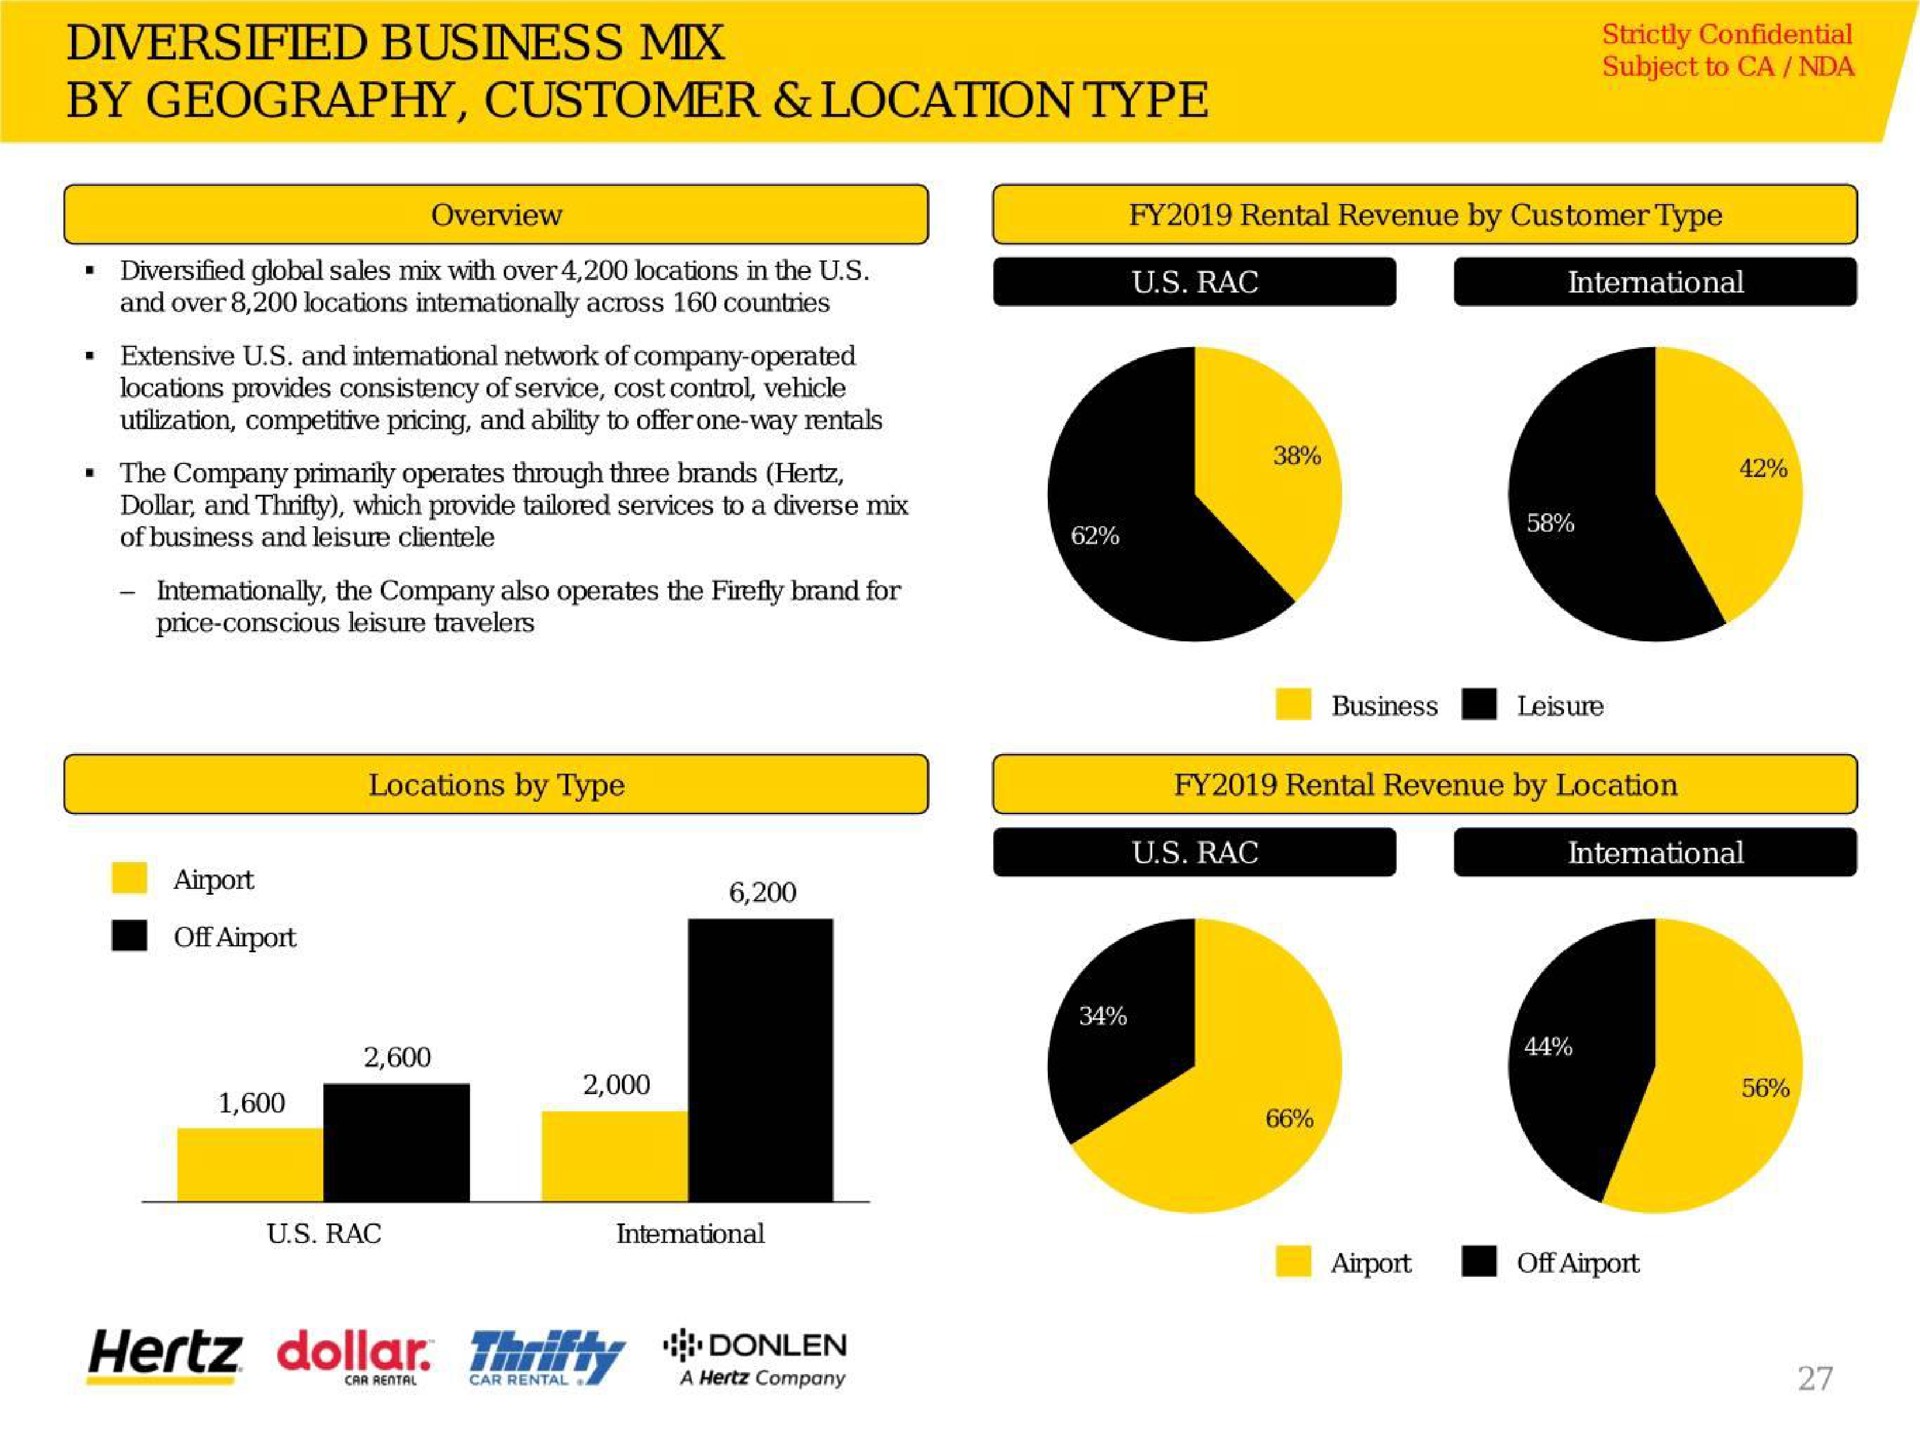 diversified business mix by geography customer location type hertz dollar | Hertz